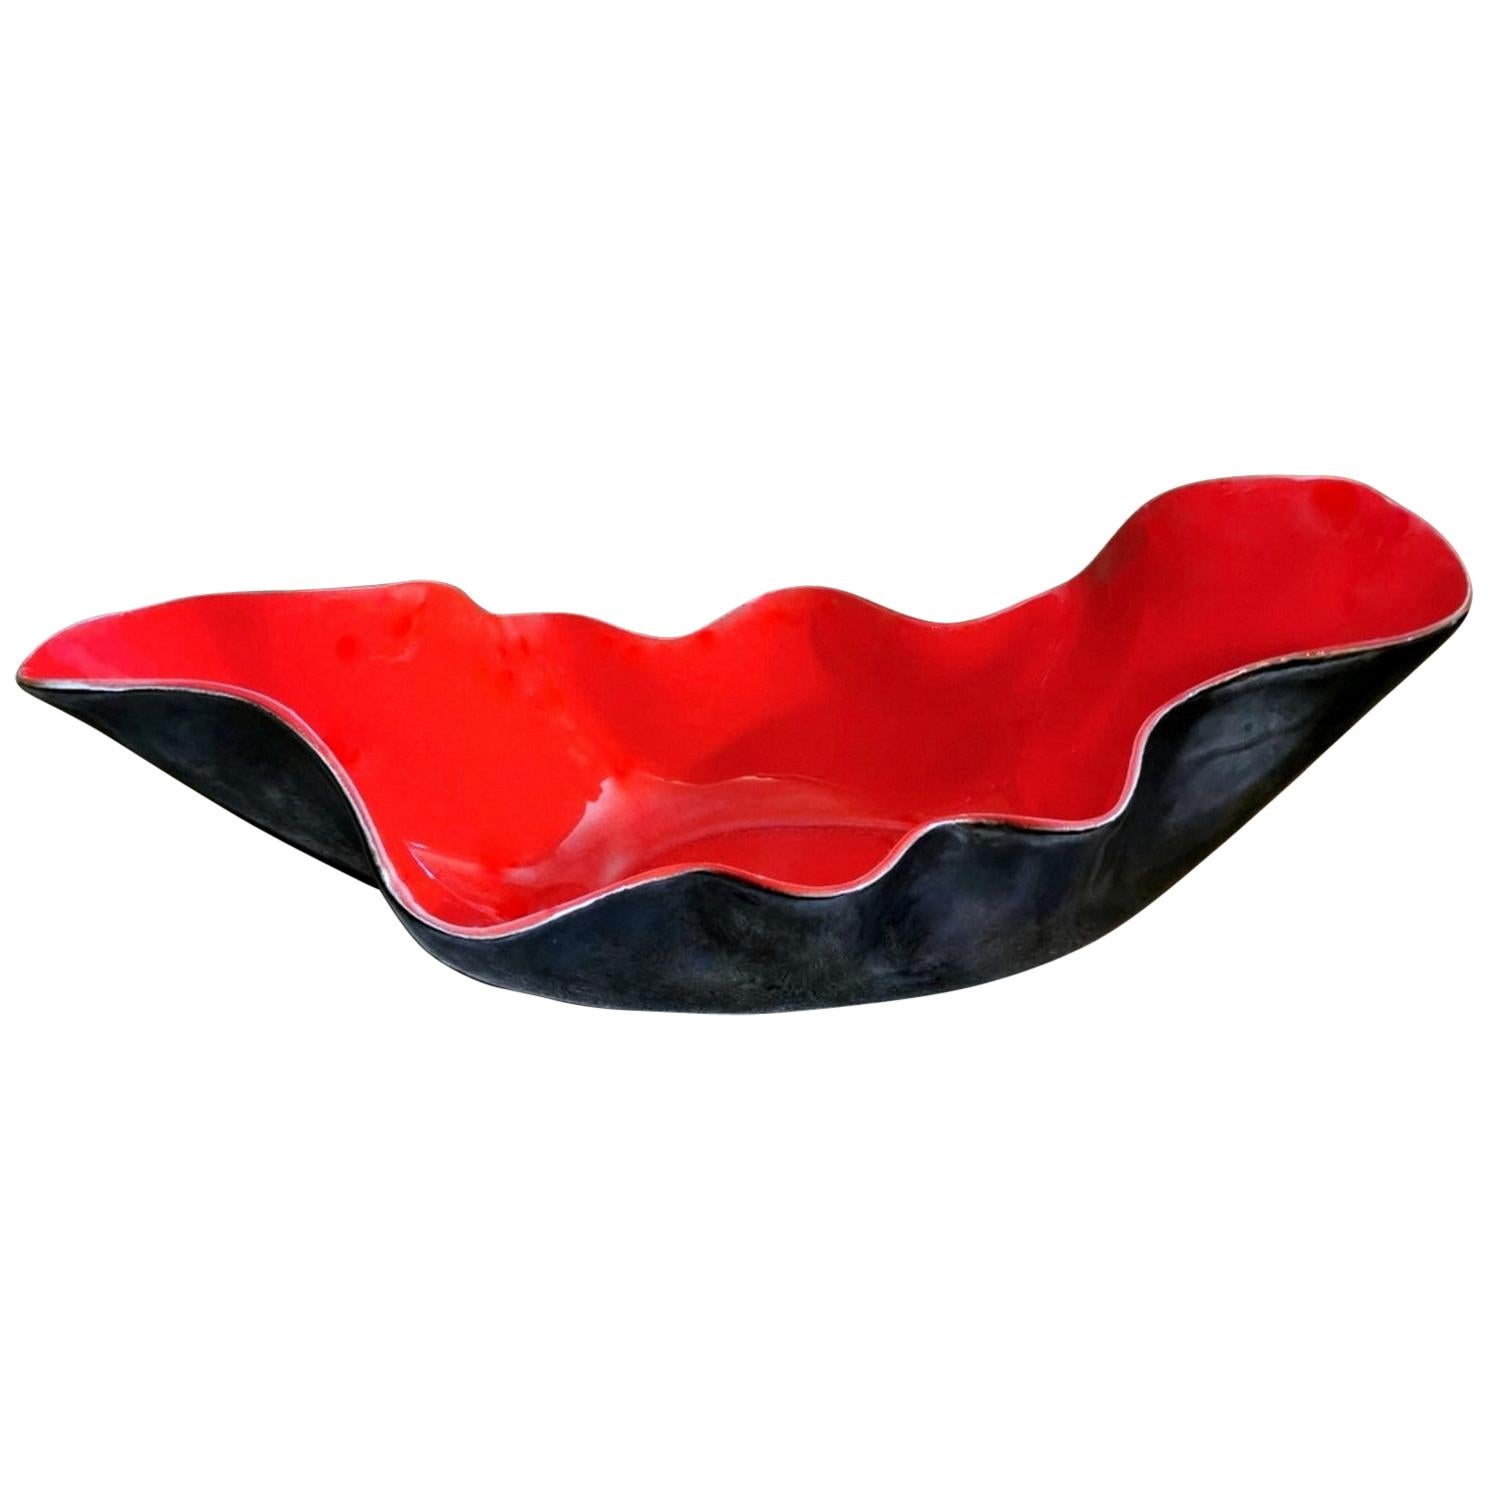 Rockabilly Style French Centrepiece Red and Black Ceramic